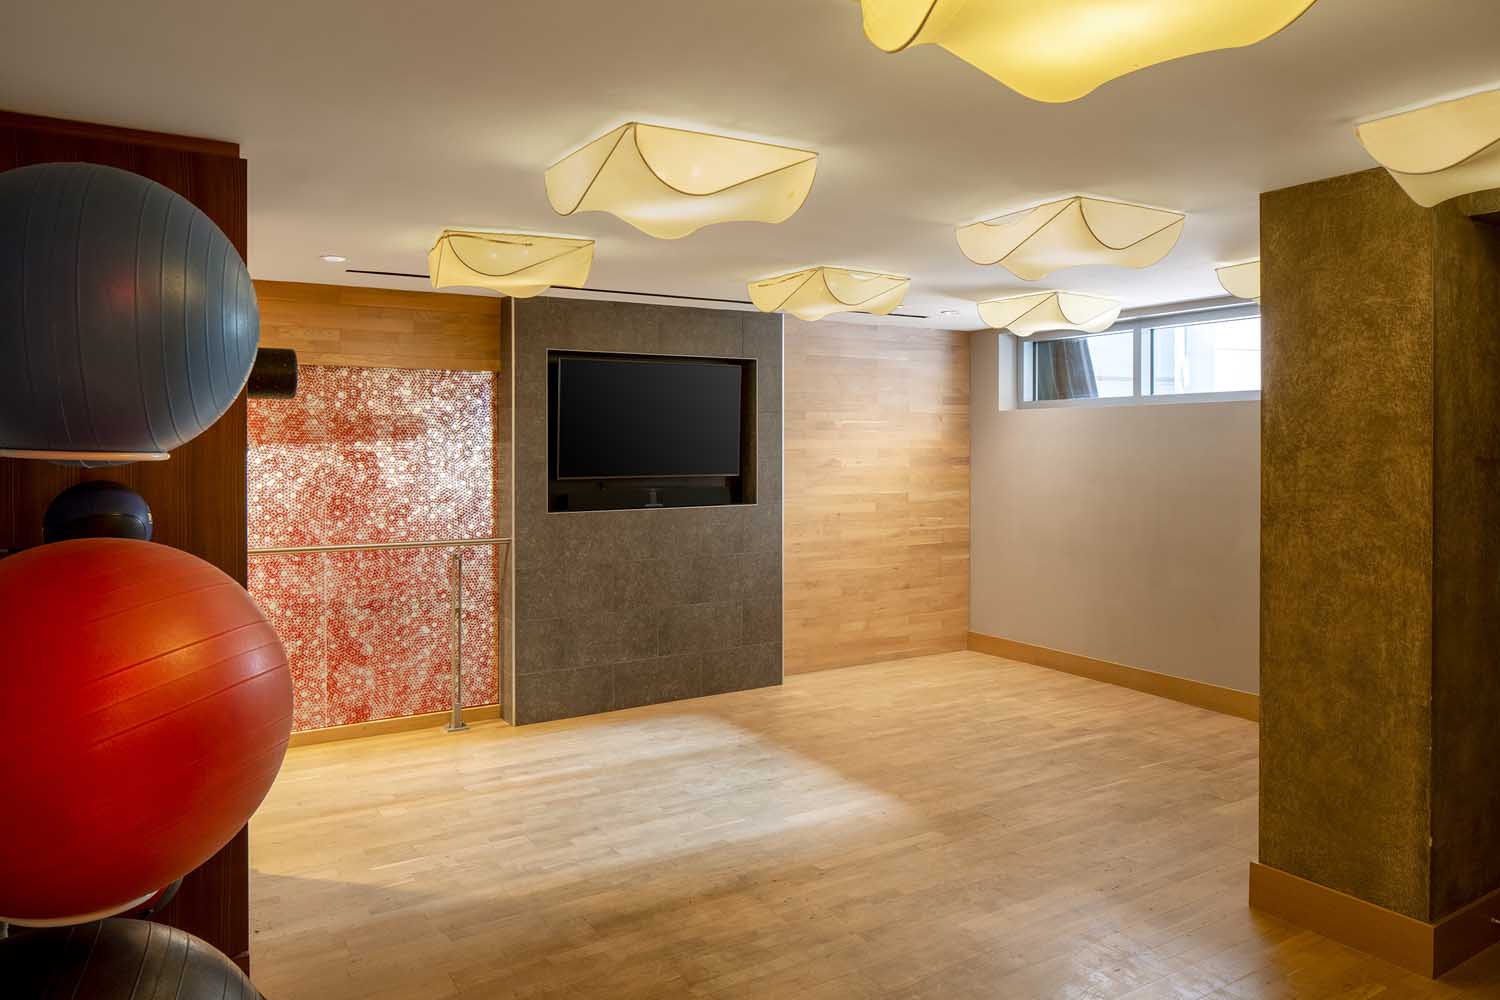 Stretch out in our expansive yoga room.